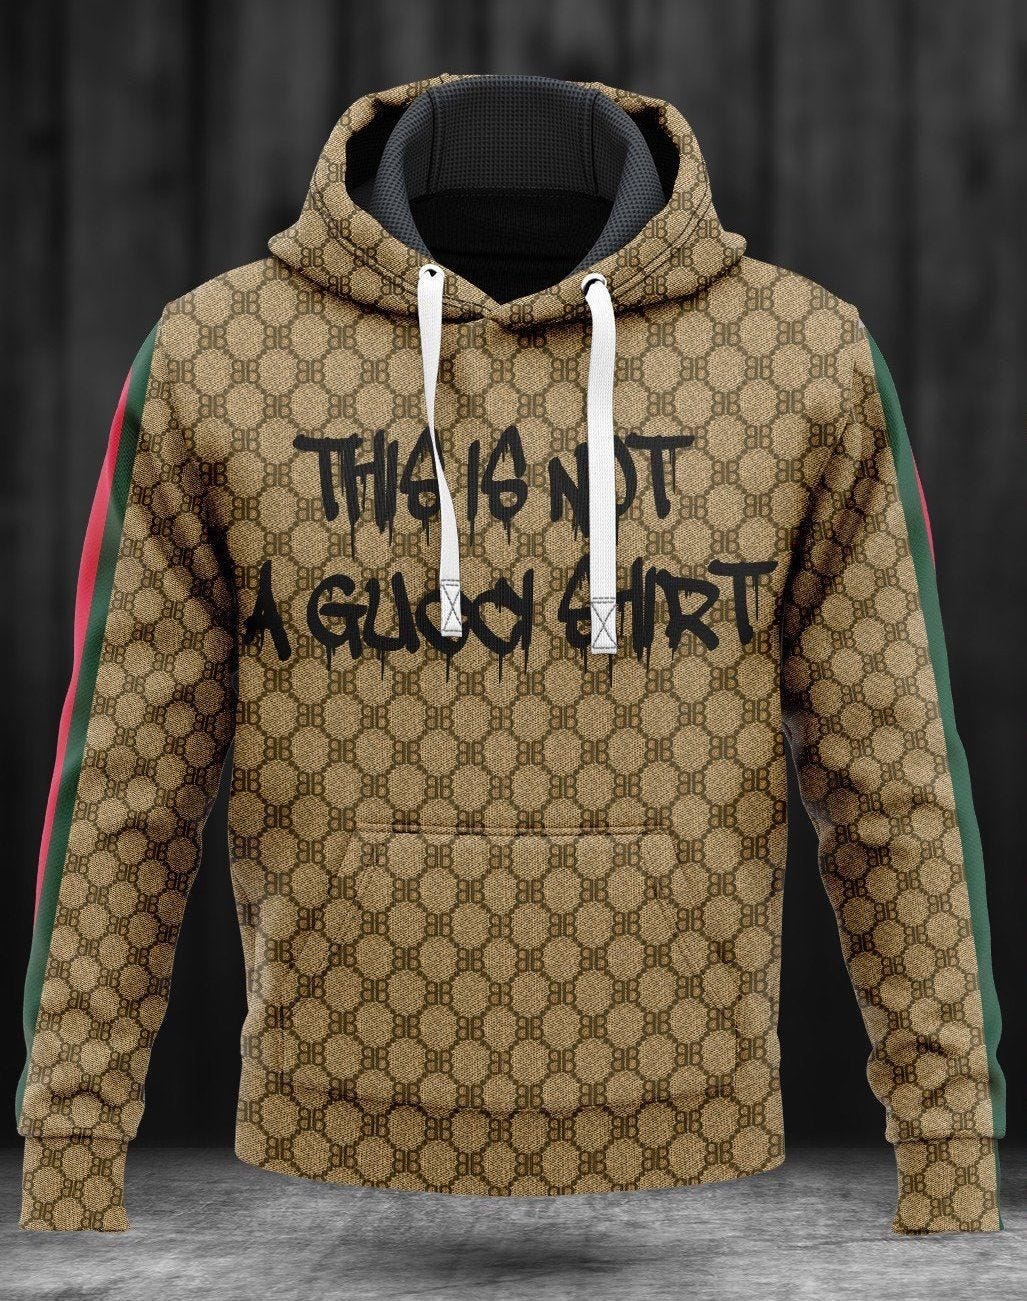 Gucci This Is Not A Shirt Type 289 Luxury Hoodie Outfit Fashion Brand ...